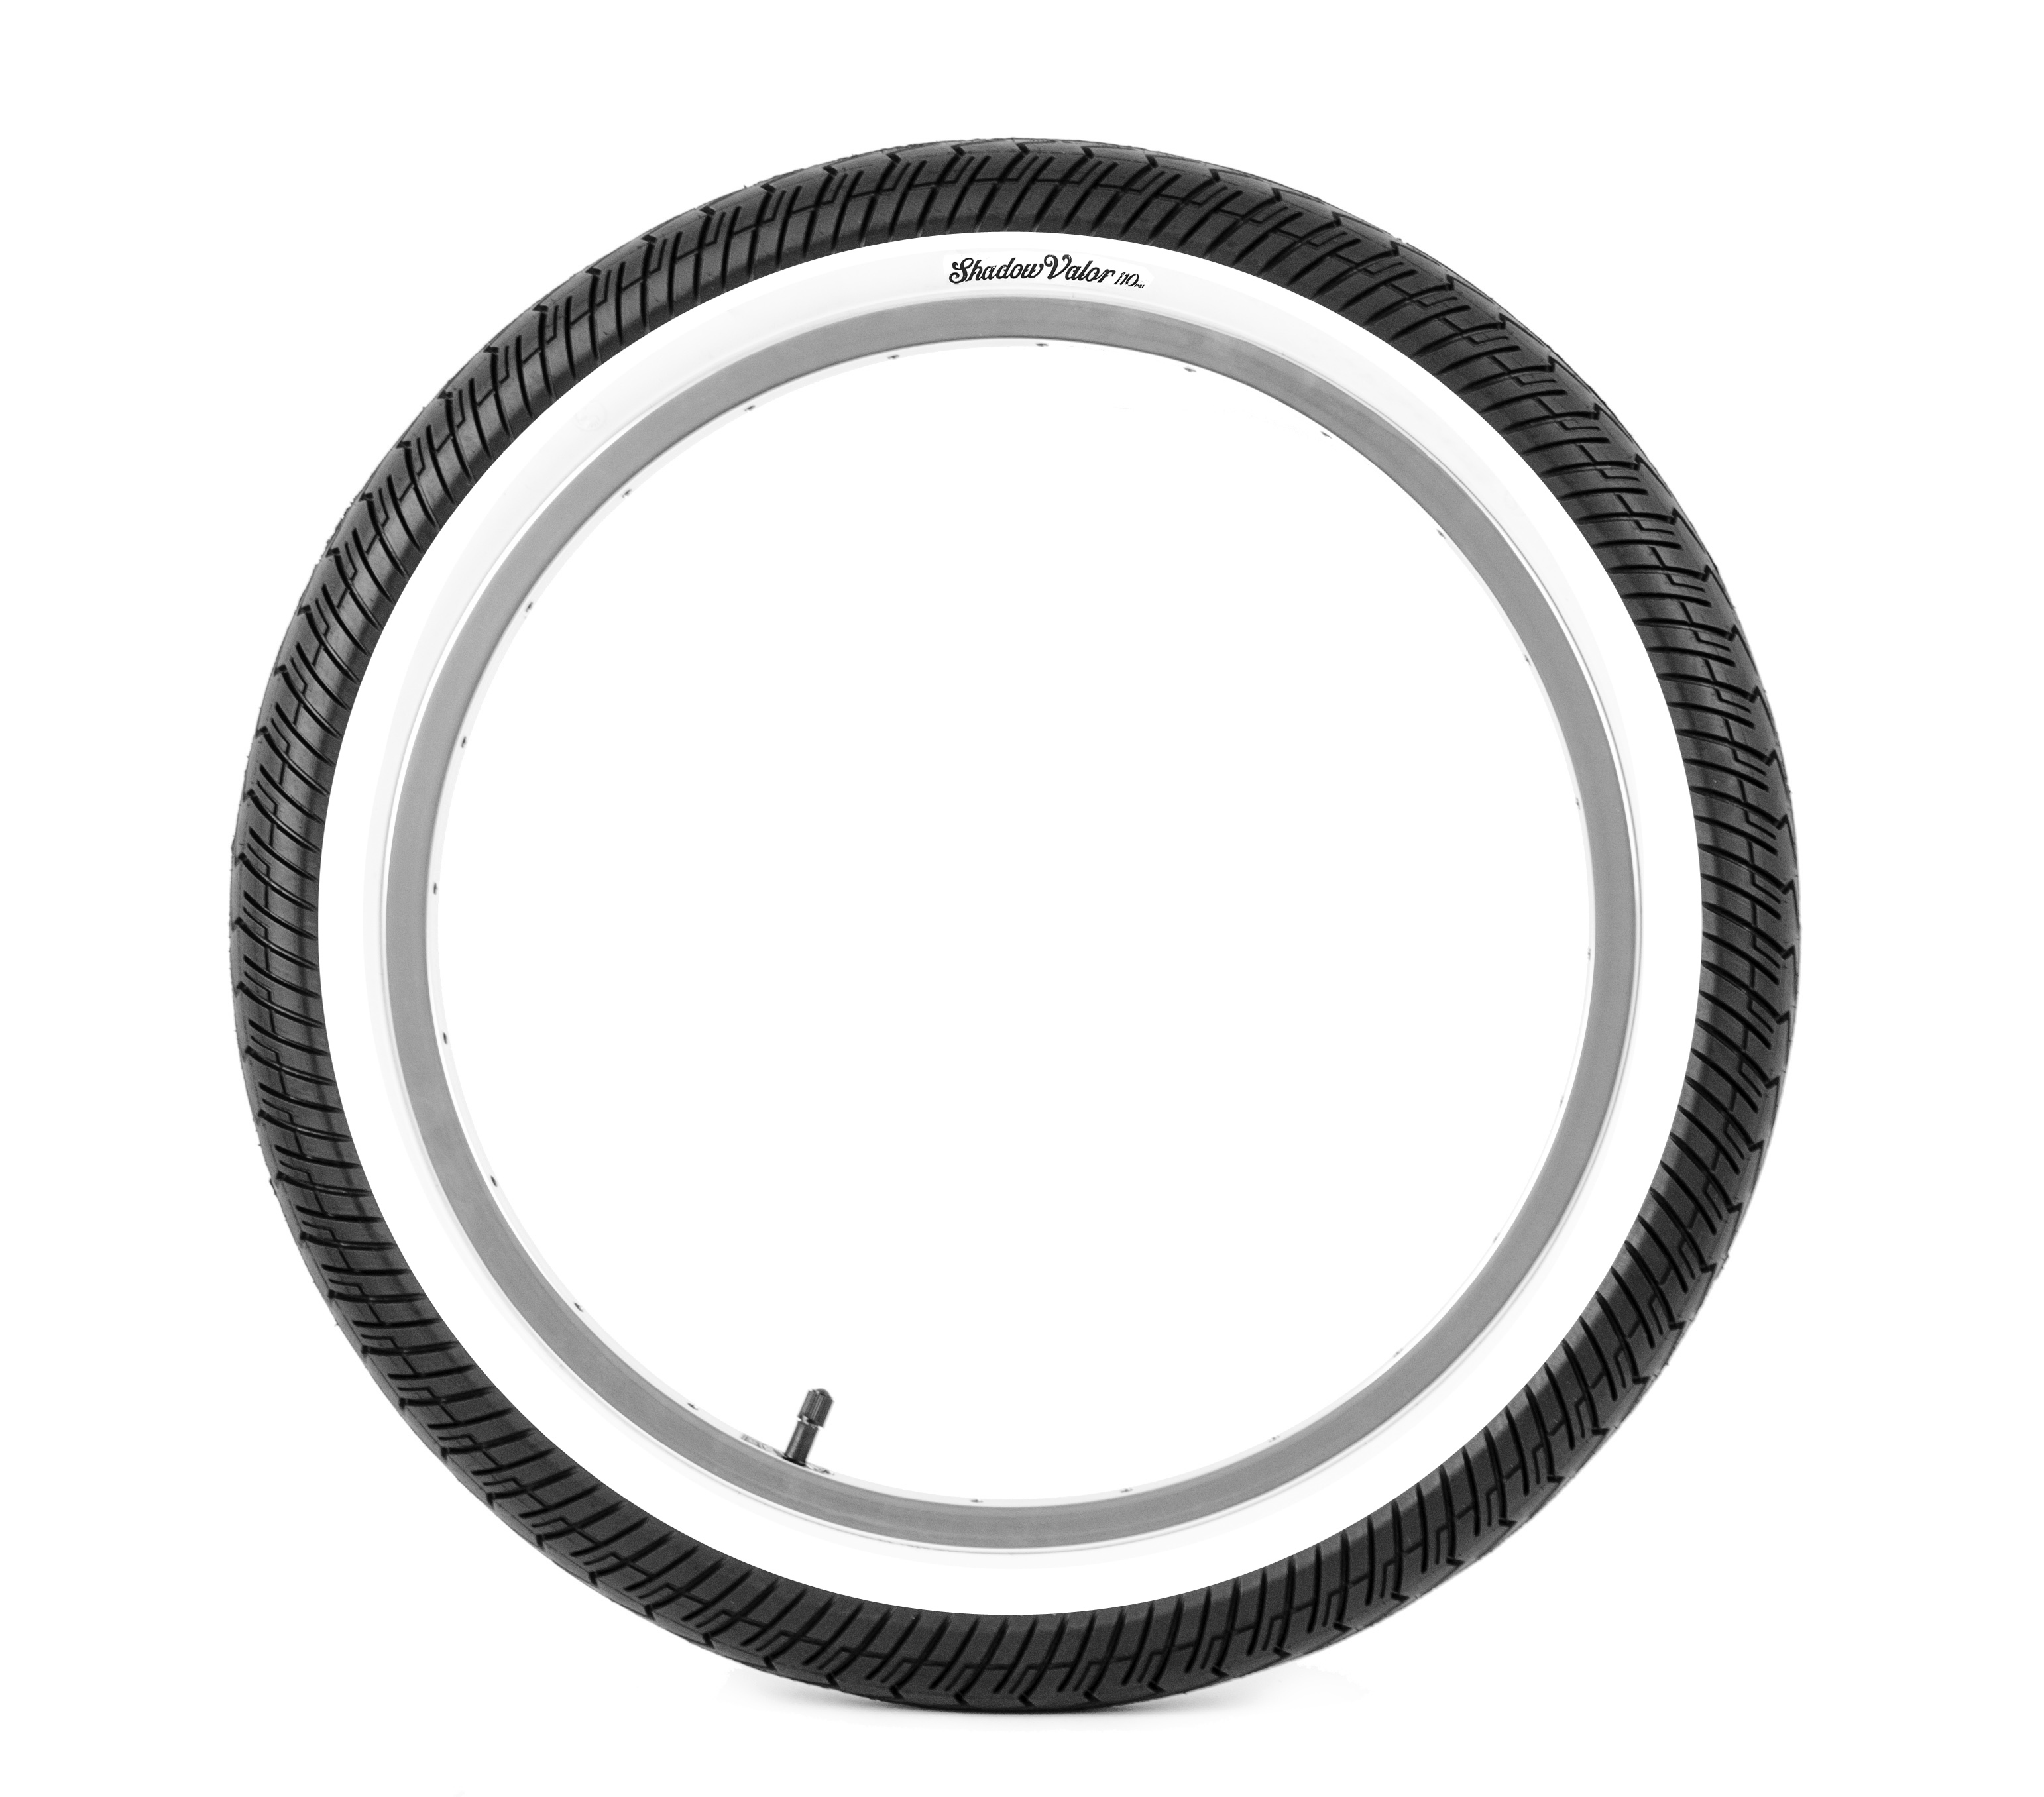 Shadow Valor Tire White Wall